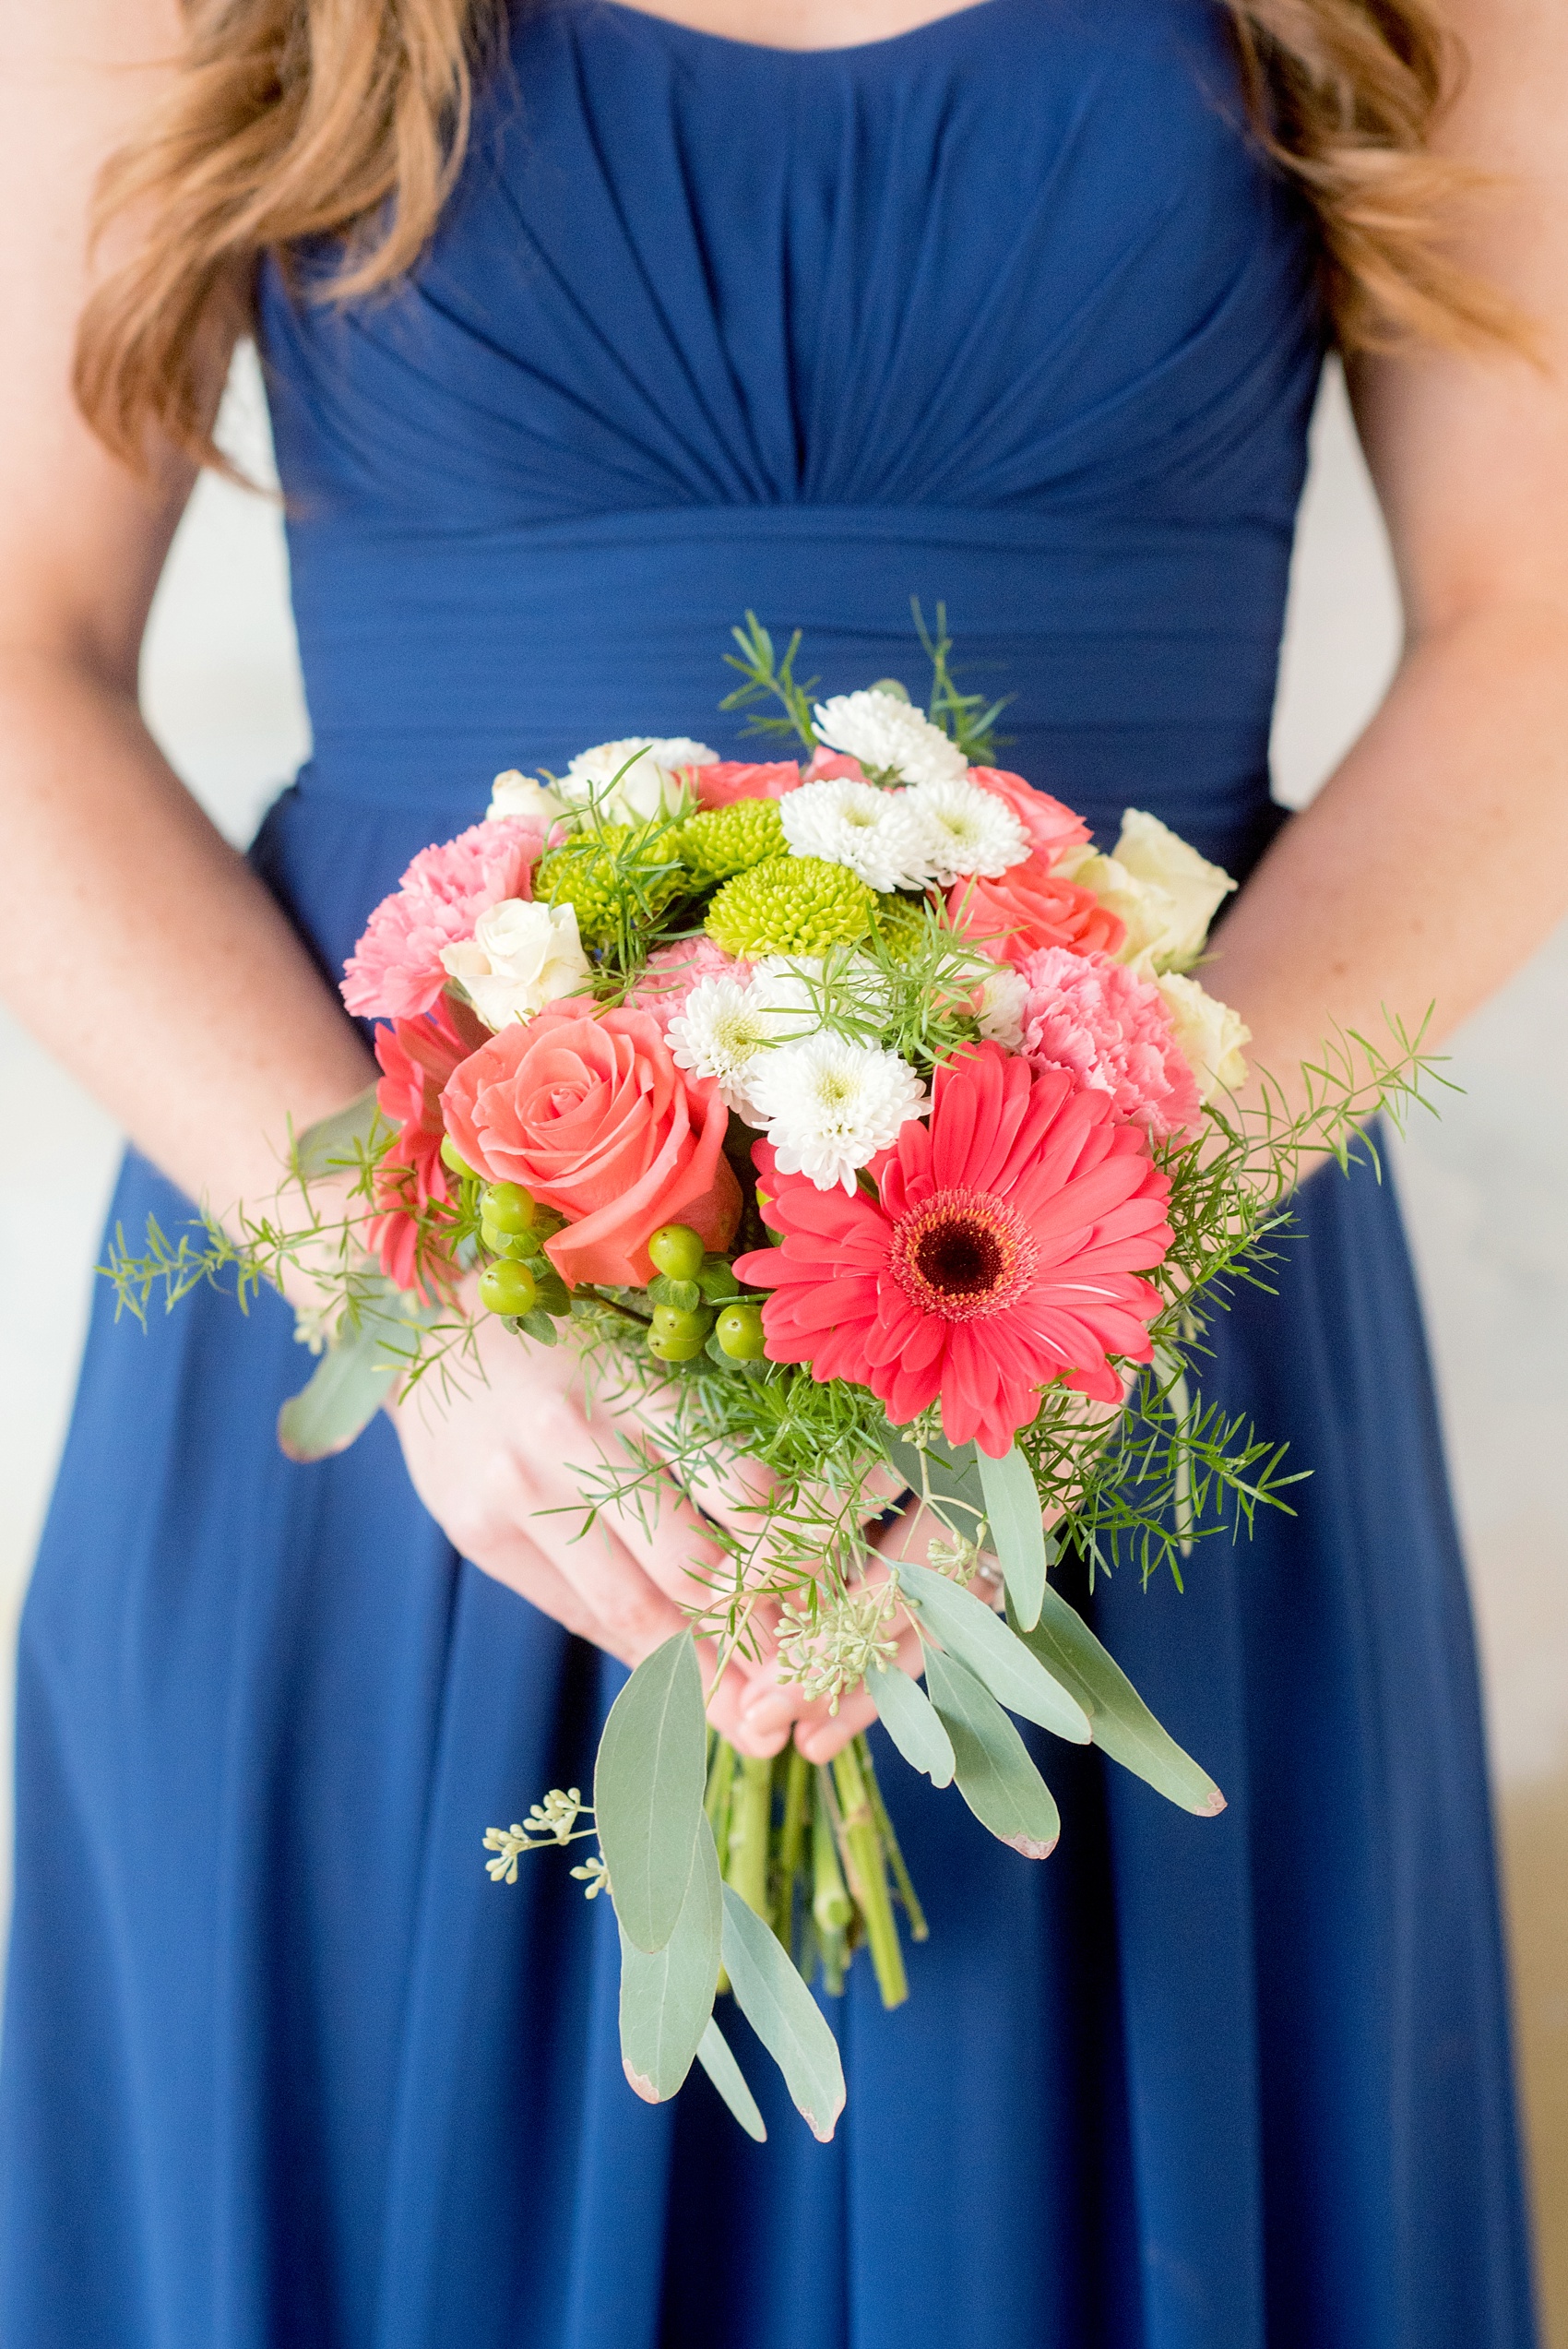 Mikkel Paige Photography photos from a wedding at The Stockroom at 230. A picture of a bridesmaid's fall bouquet of pink, coral and green flowers.